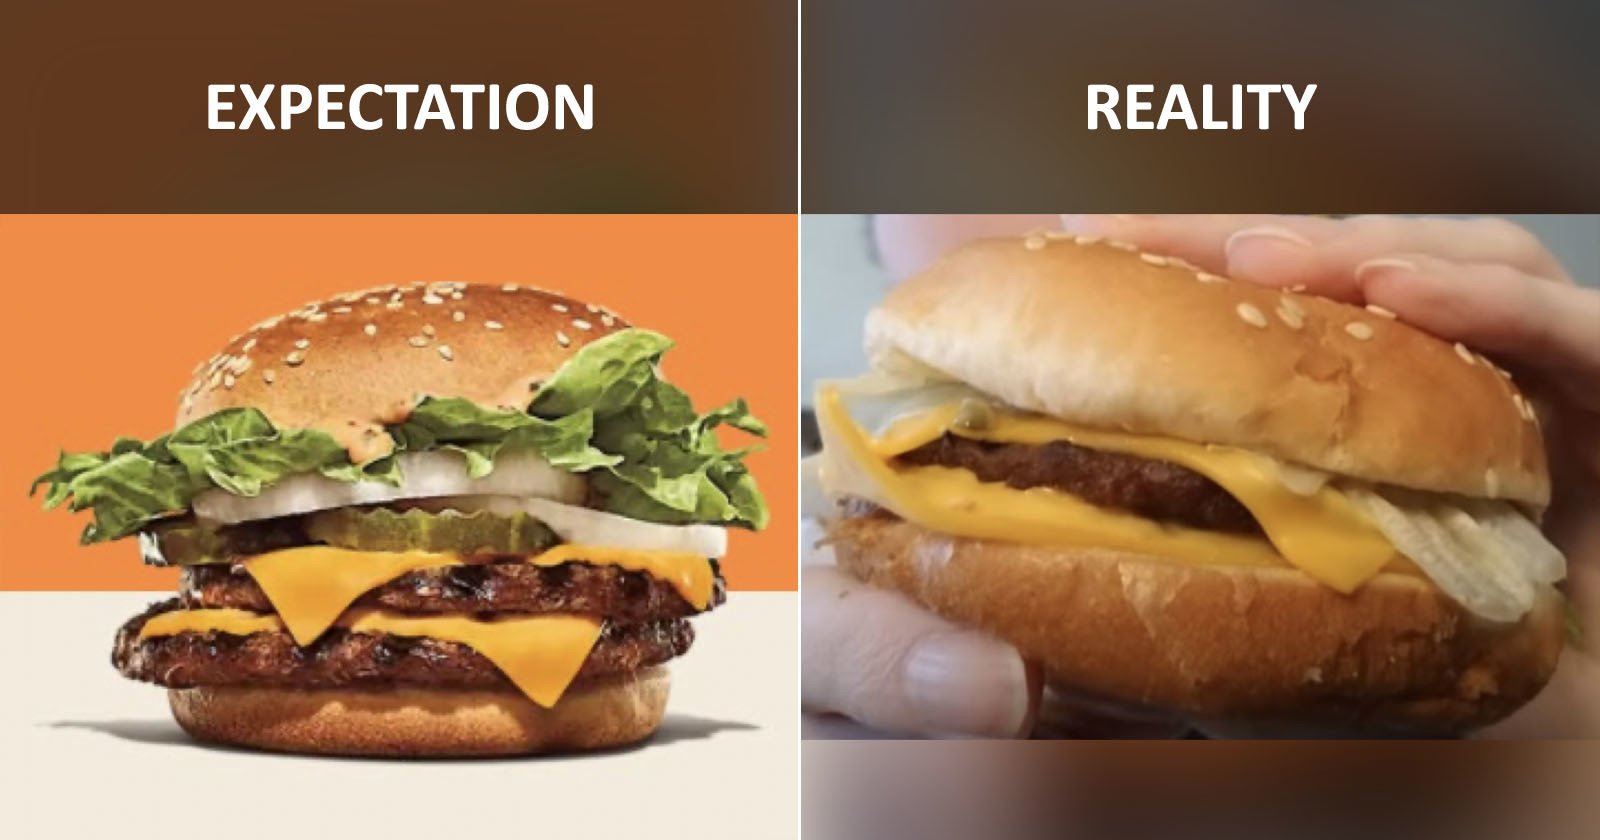 Burger King Sued Over Misleading Ad Photos of Its Burgers